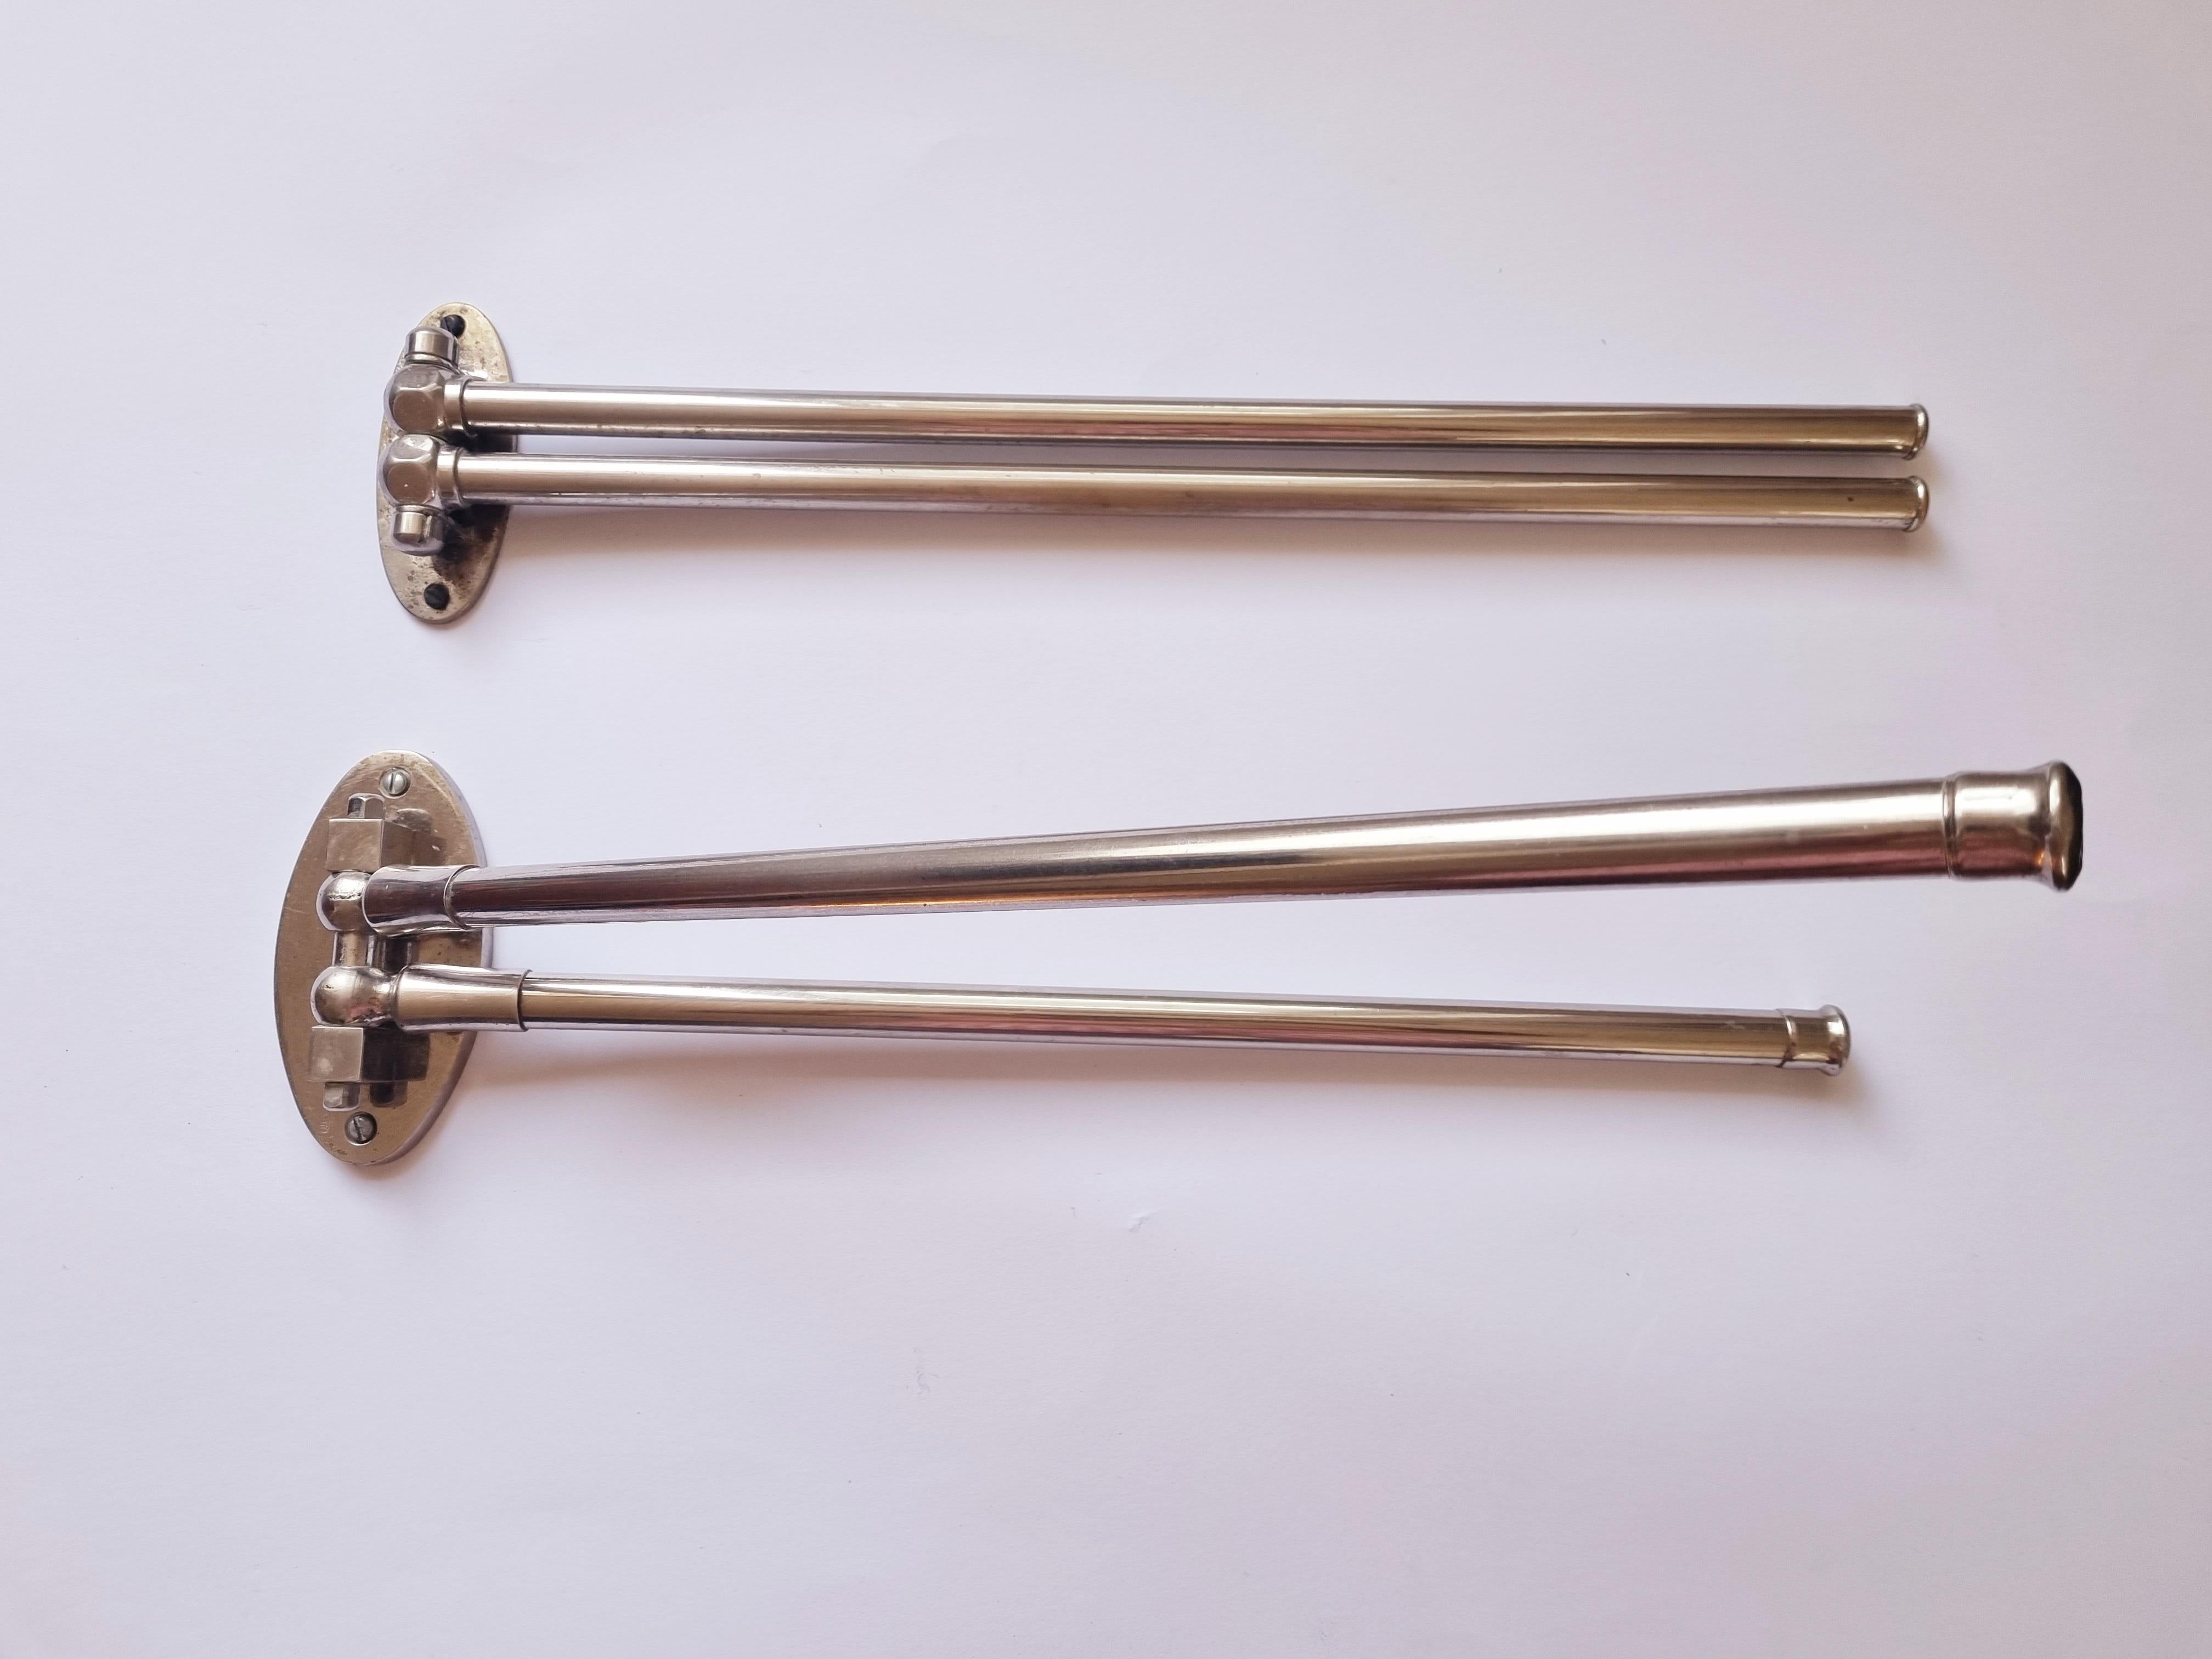 Set of Two Functionalism, Art Deco Chrome Towel Holders, 1930s For Sale 6